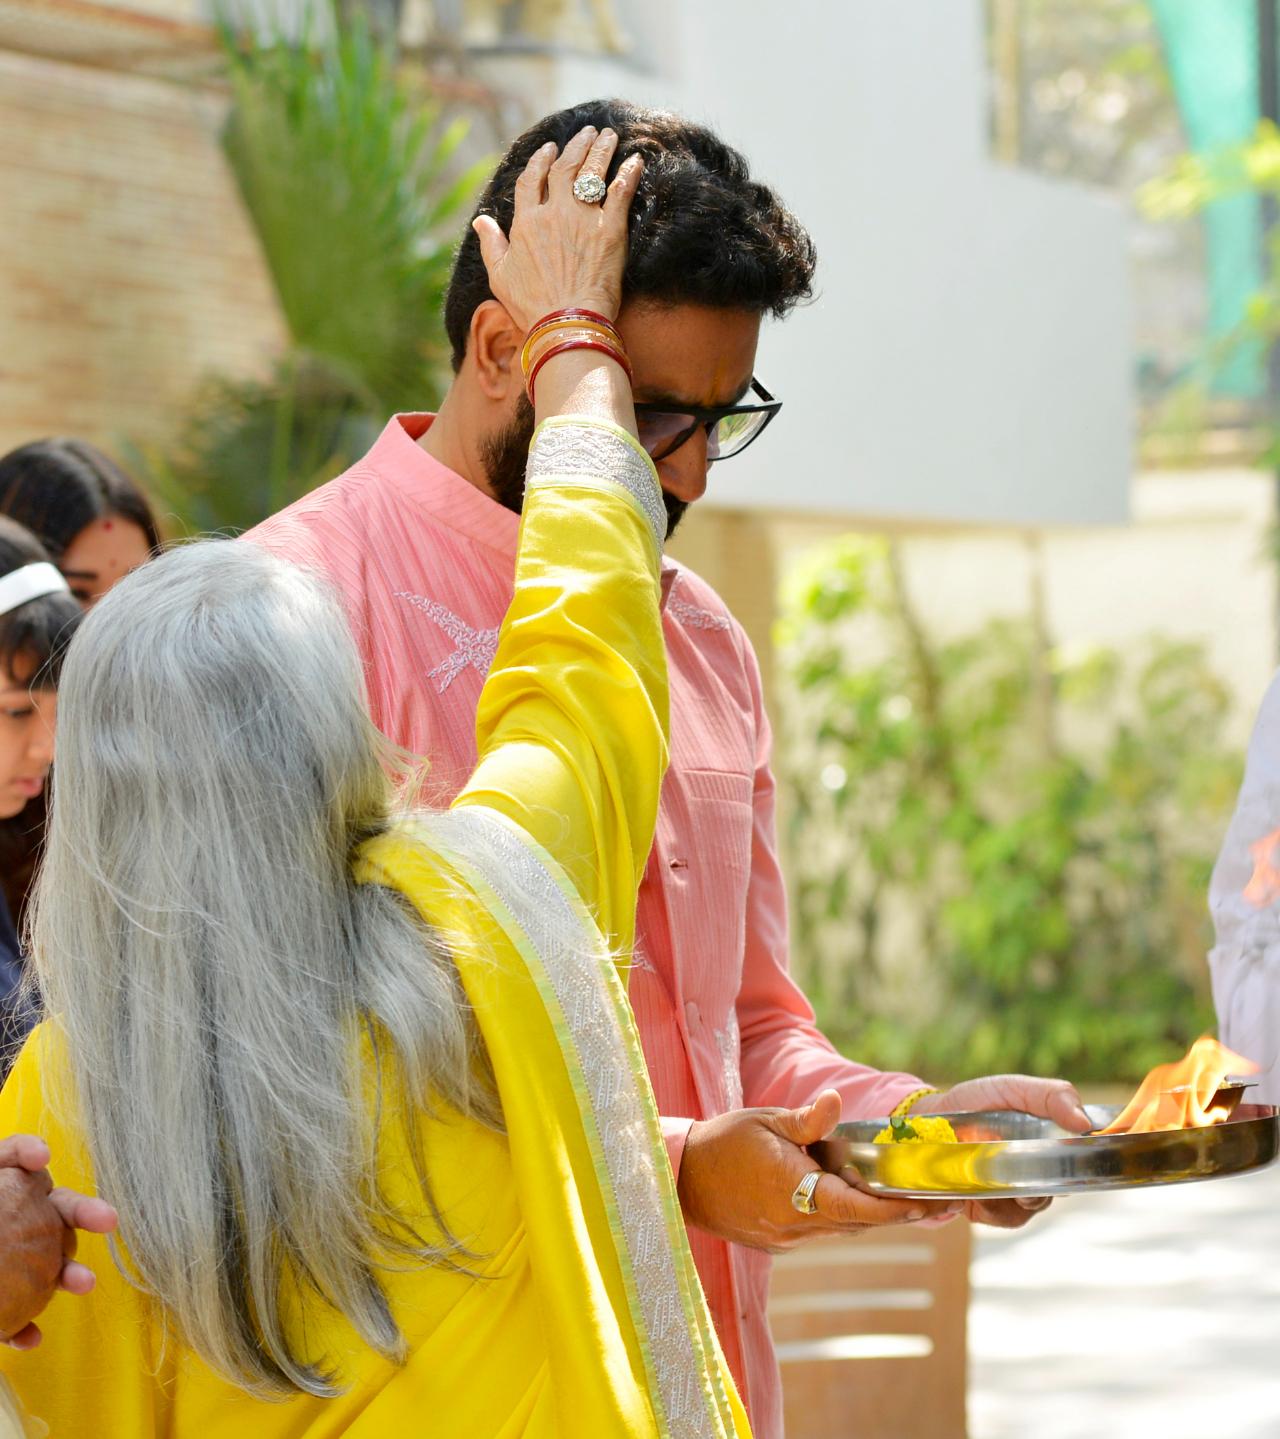 In one of the pictures, Jaya Bachchan can be seen blessing Abhishek Bachchan while he holds a puja thali. Jaya Bachchan was seen in a yellow suit for the puja